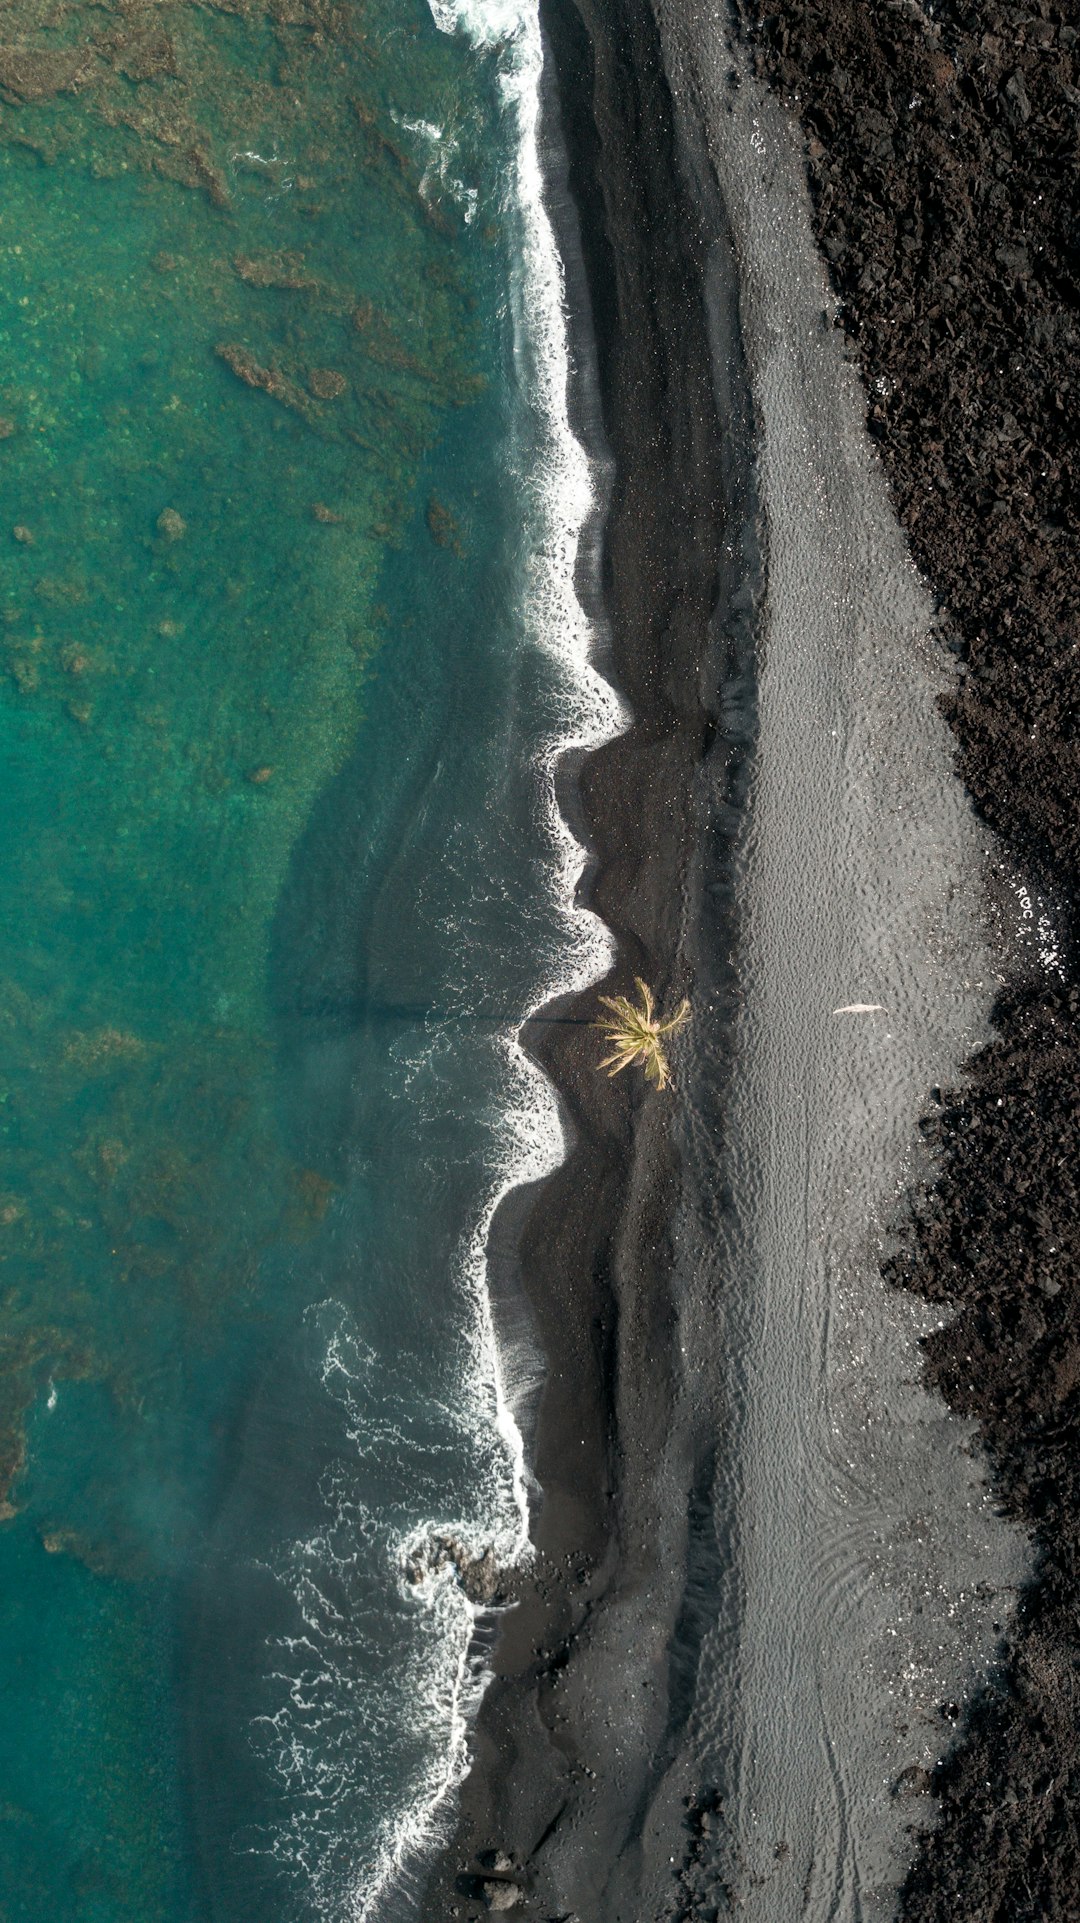 black sand beach aerial view, palm tree in the distance, turquoise water, black lava rock, drone photography, in the style of national geographic photo –ar 71:128